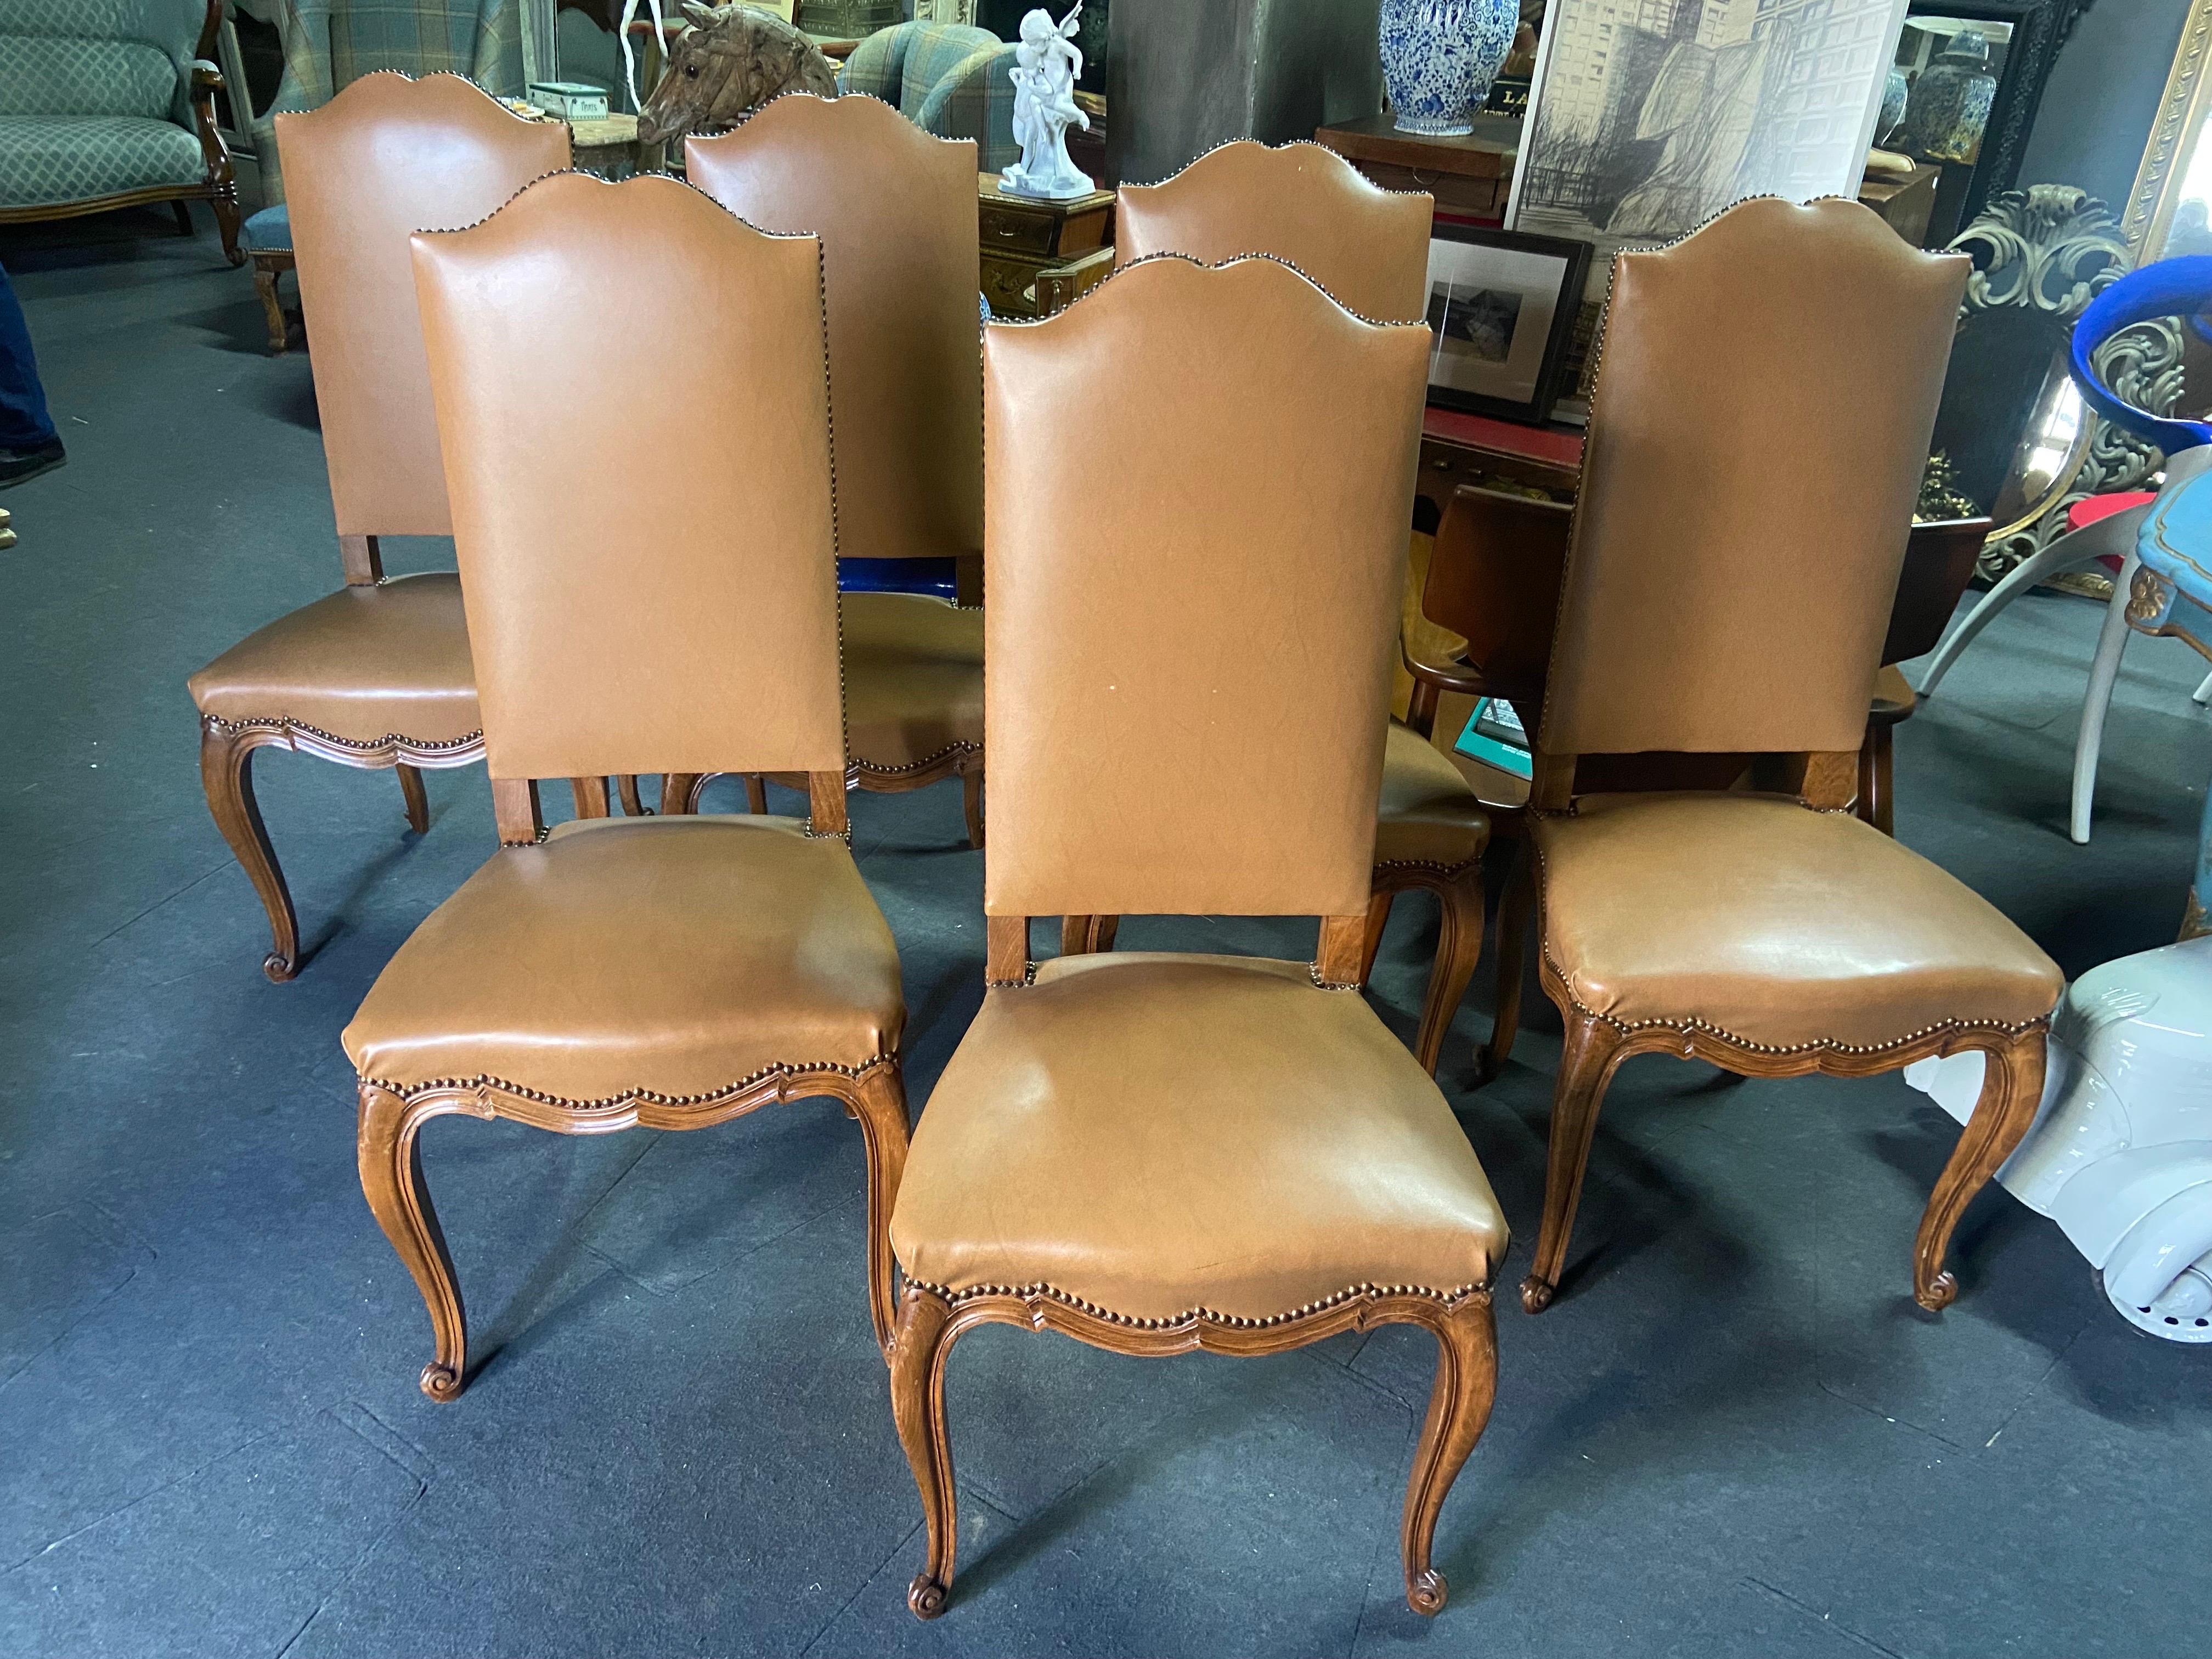 Six French dining chairs in the style of Louis XV all made of walnut with a caramel leather upholstery. Very high and comfortable backs. Very good condition.
   